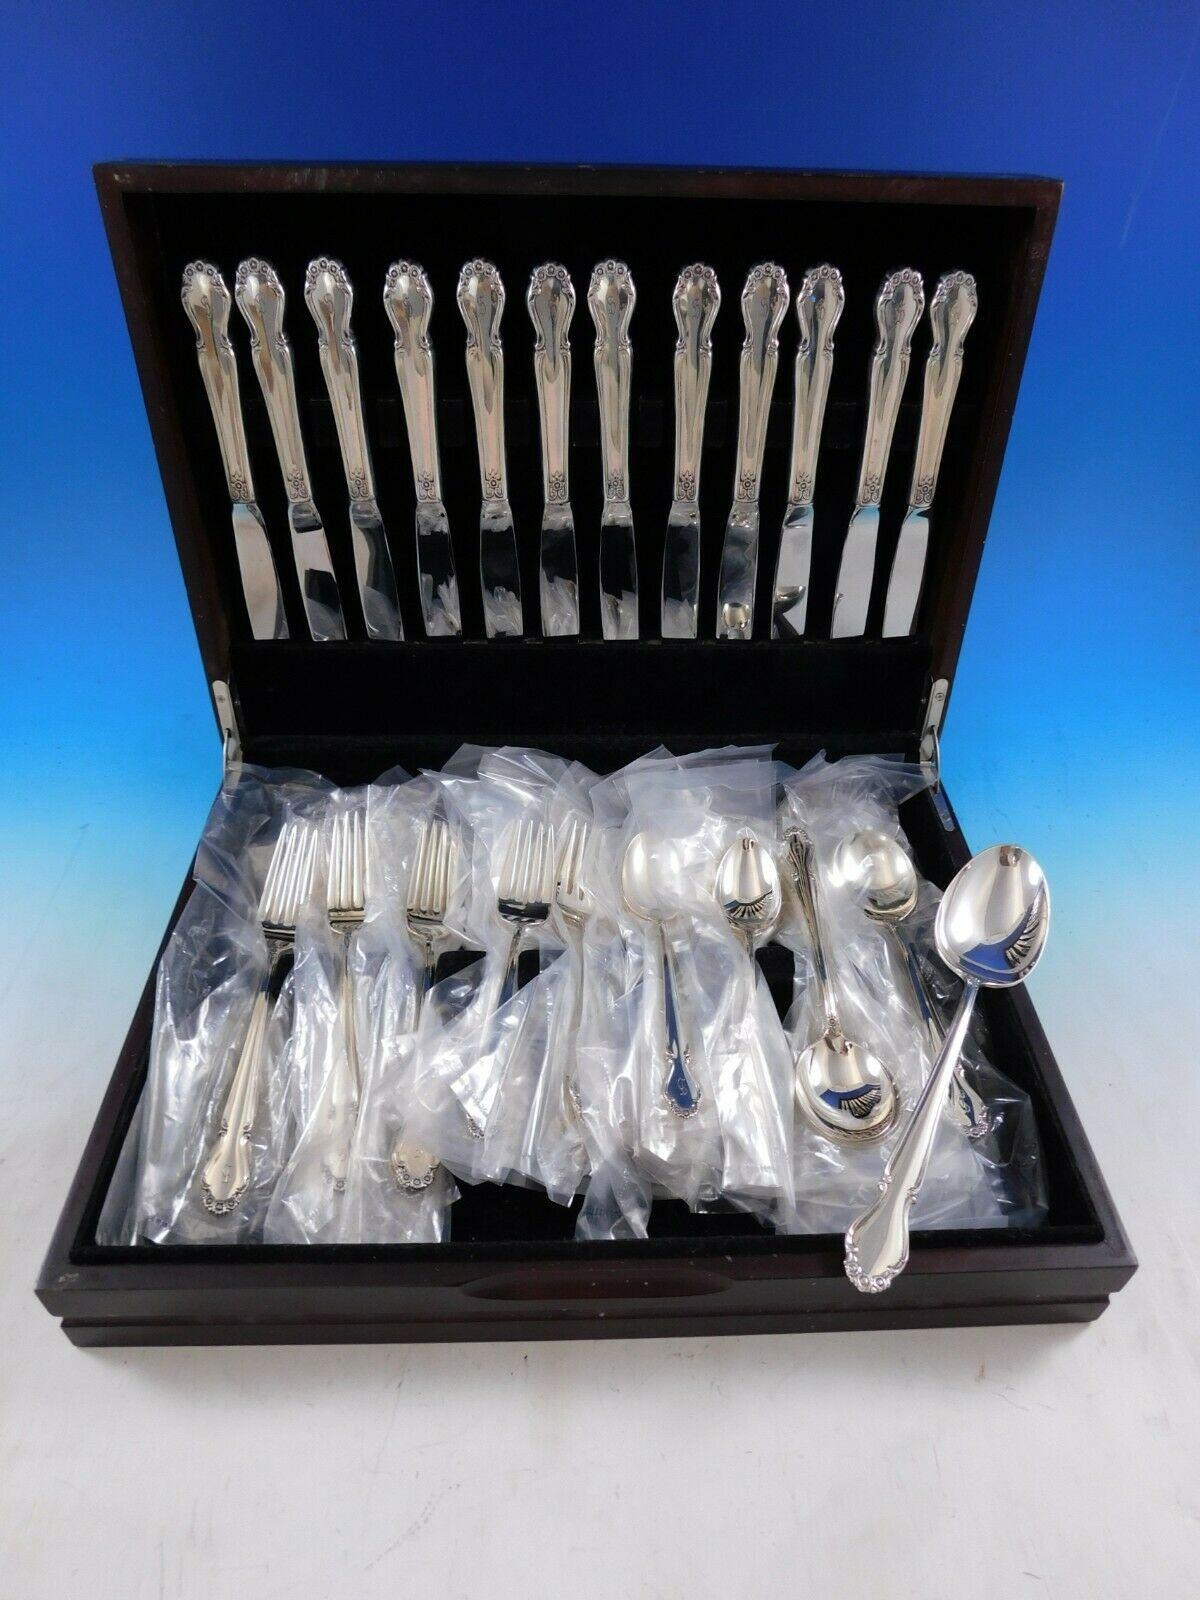 Wedding bells by International Sterling Silver flatware set - 61 pieces. This set includes:

12 Knives, 9